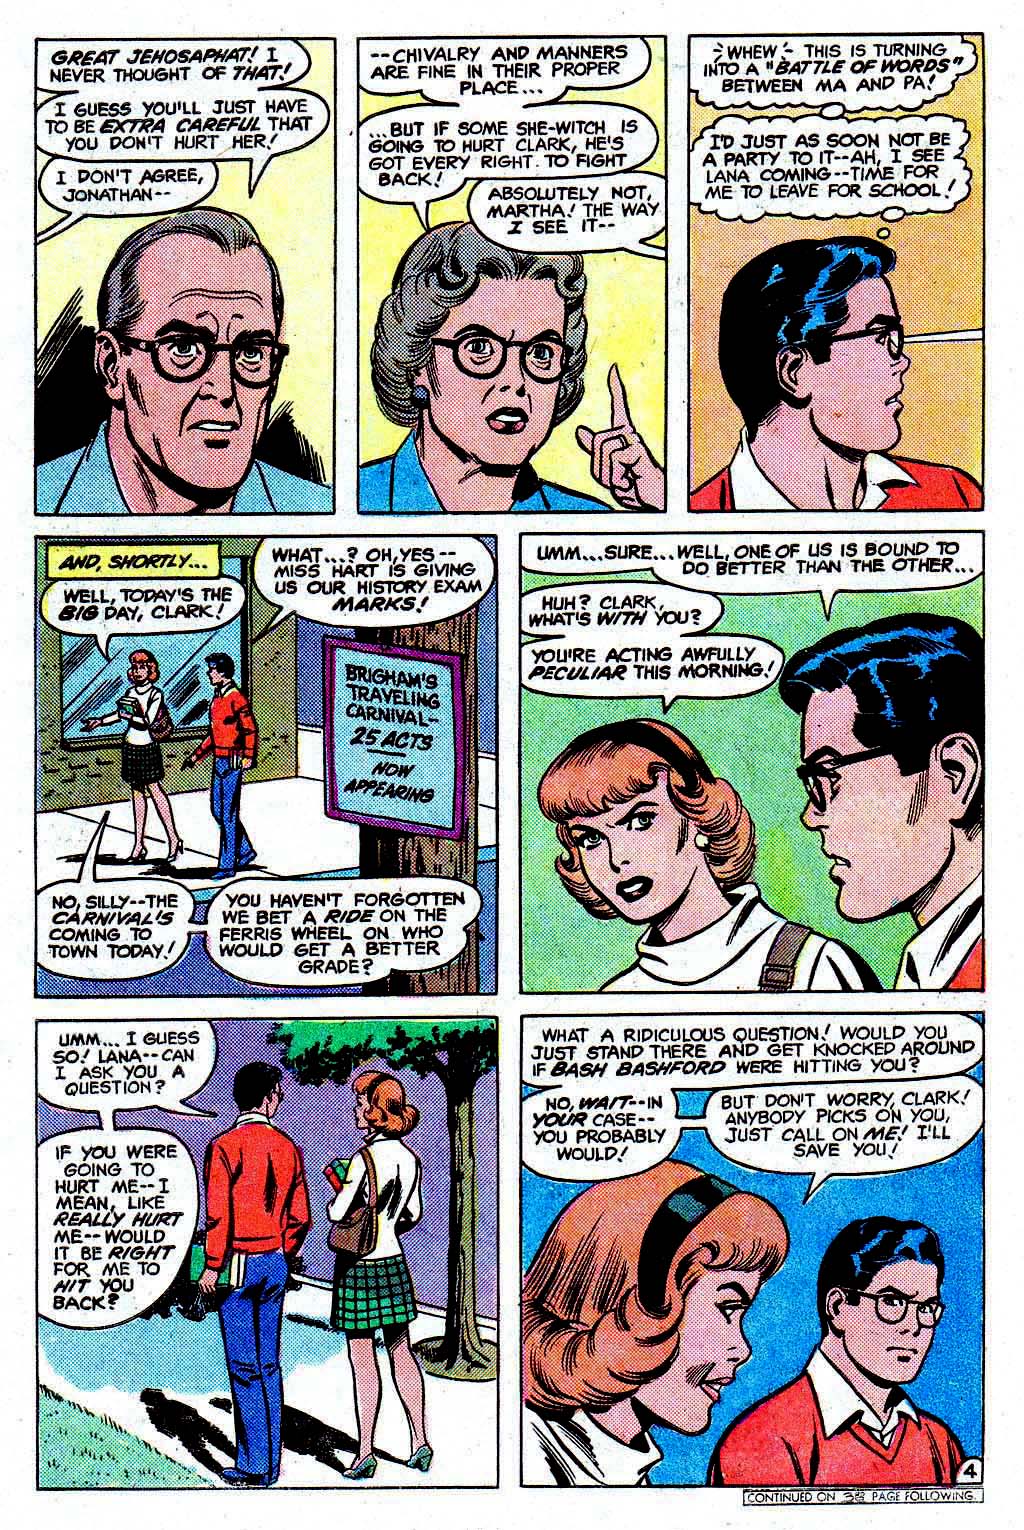 The New Adventures of Superboy 35 Page 5